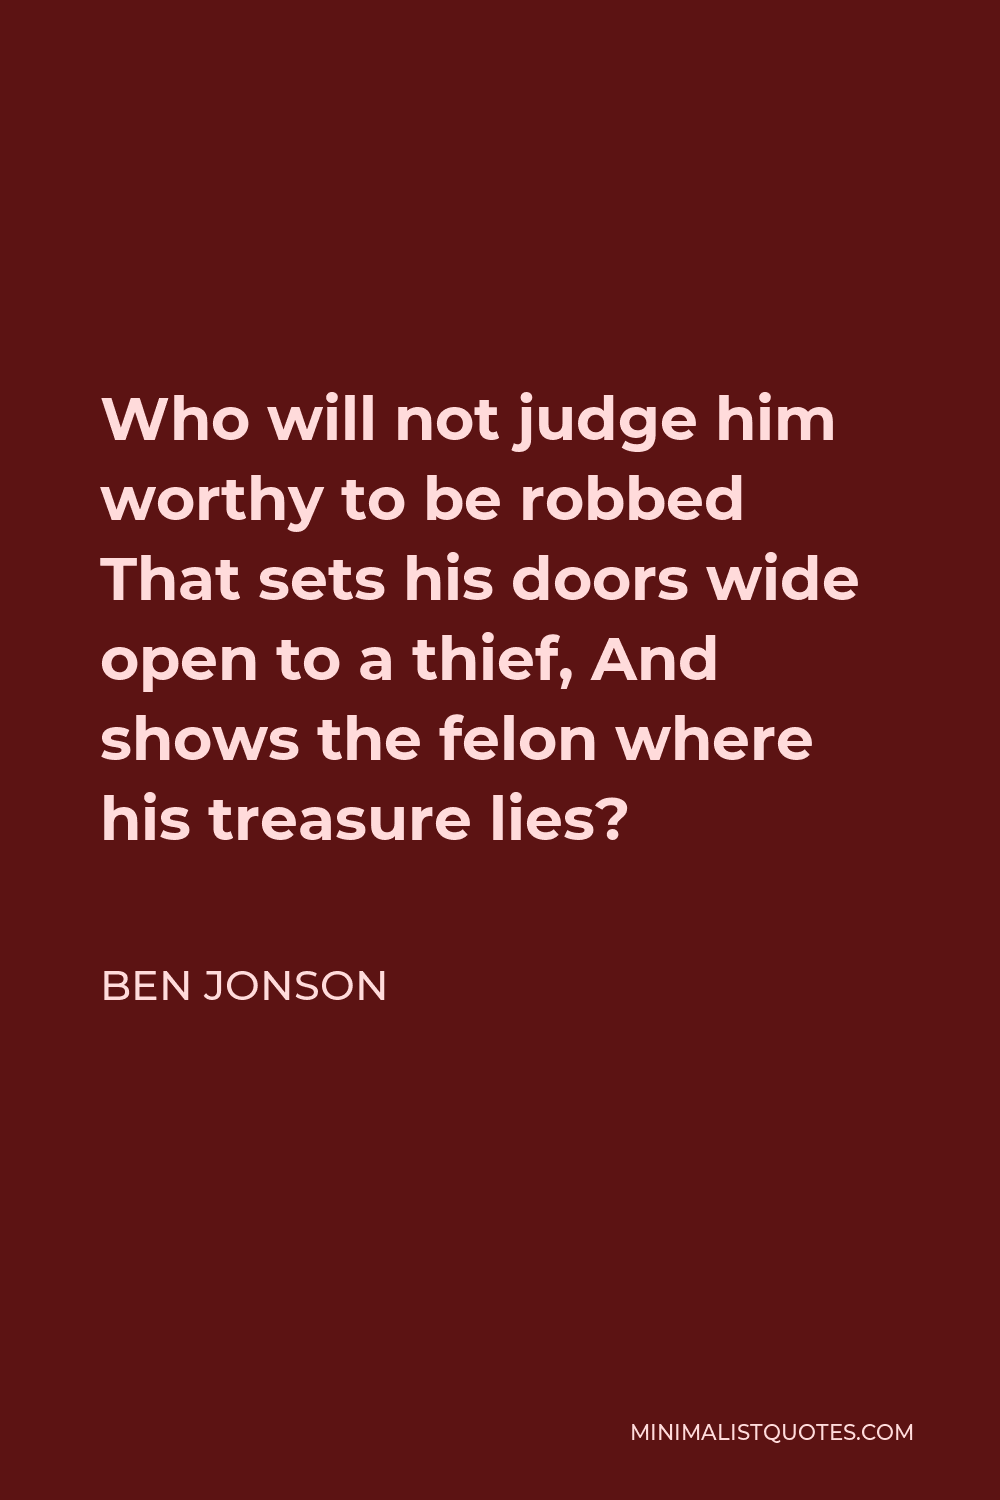 Ben Jonson Quote - Who will not judge him worthy to be robbed That sets his doors wide open to a thief, And shows the felon where his treasure lies?